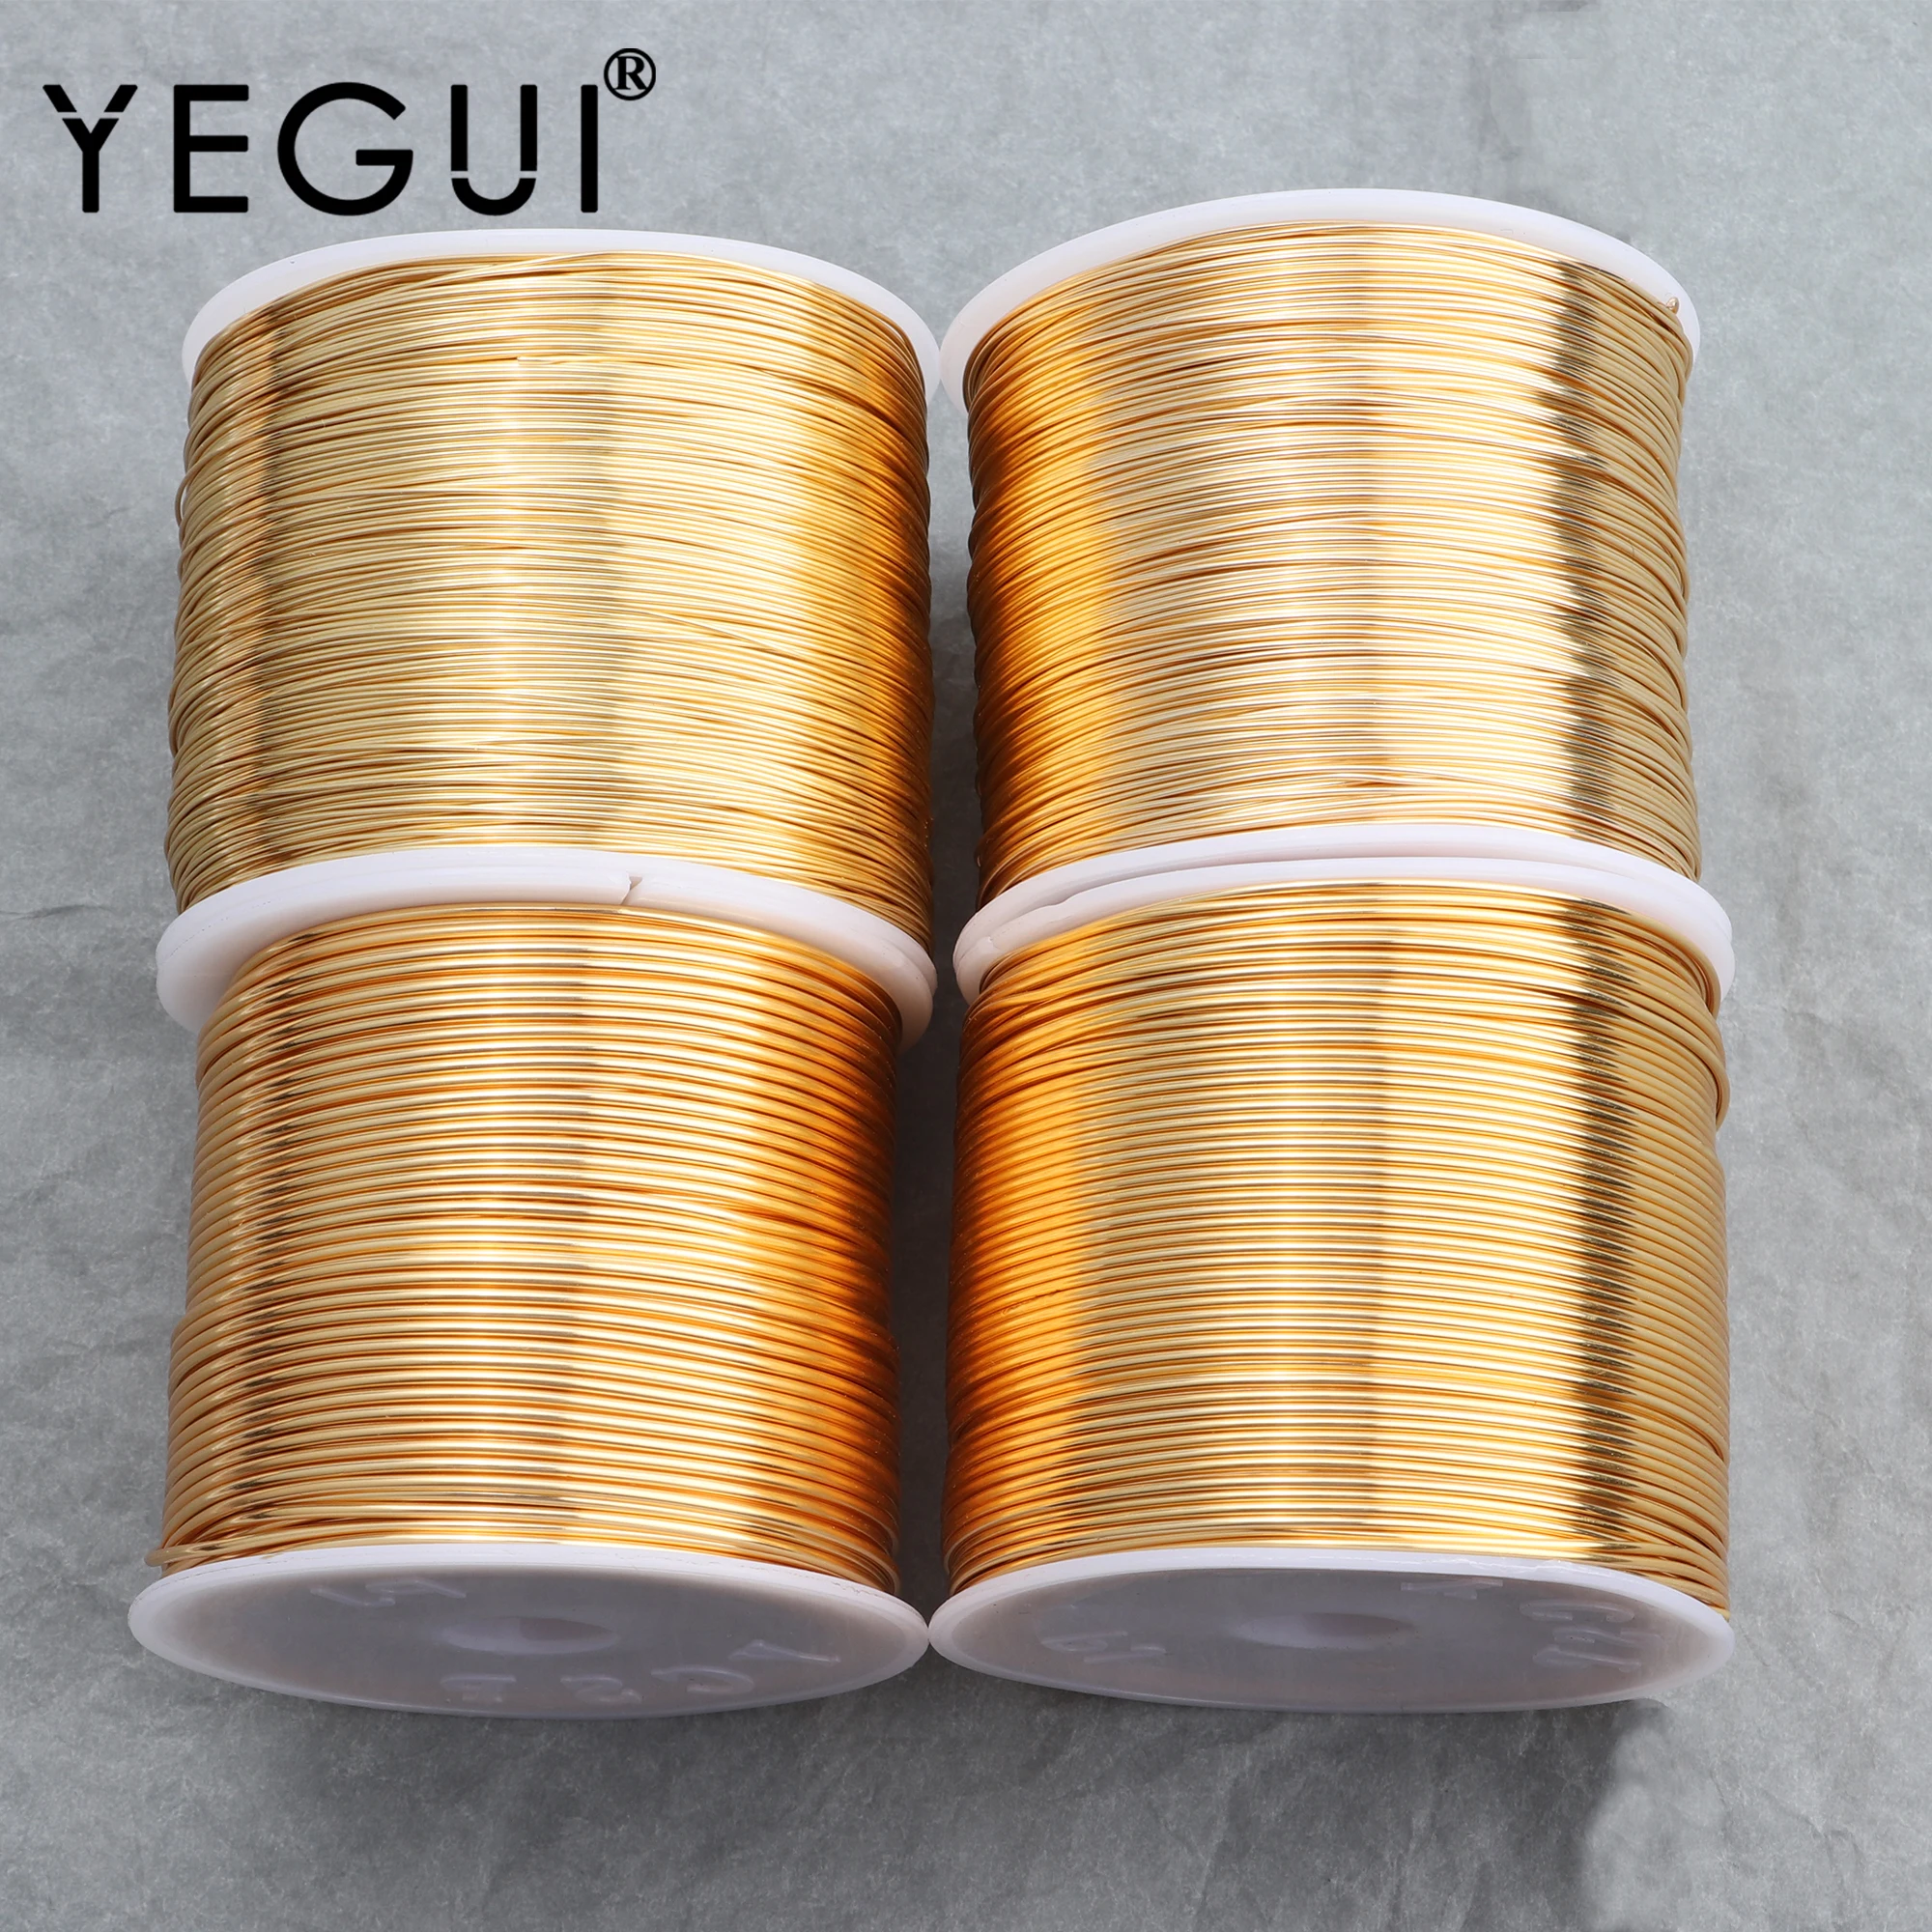 YEGUI M754,jewelry accessories,copper wire,18k gold plated,0.3 microns,jewelry making,diy bracelet necklace,one roll/lot